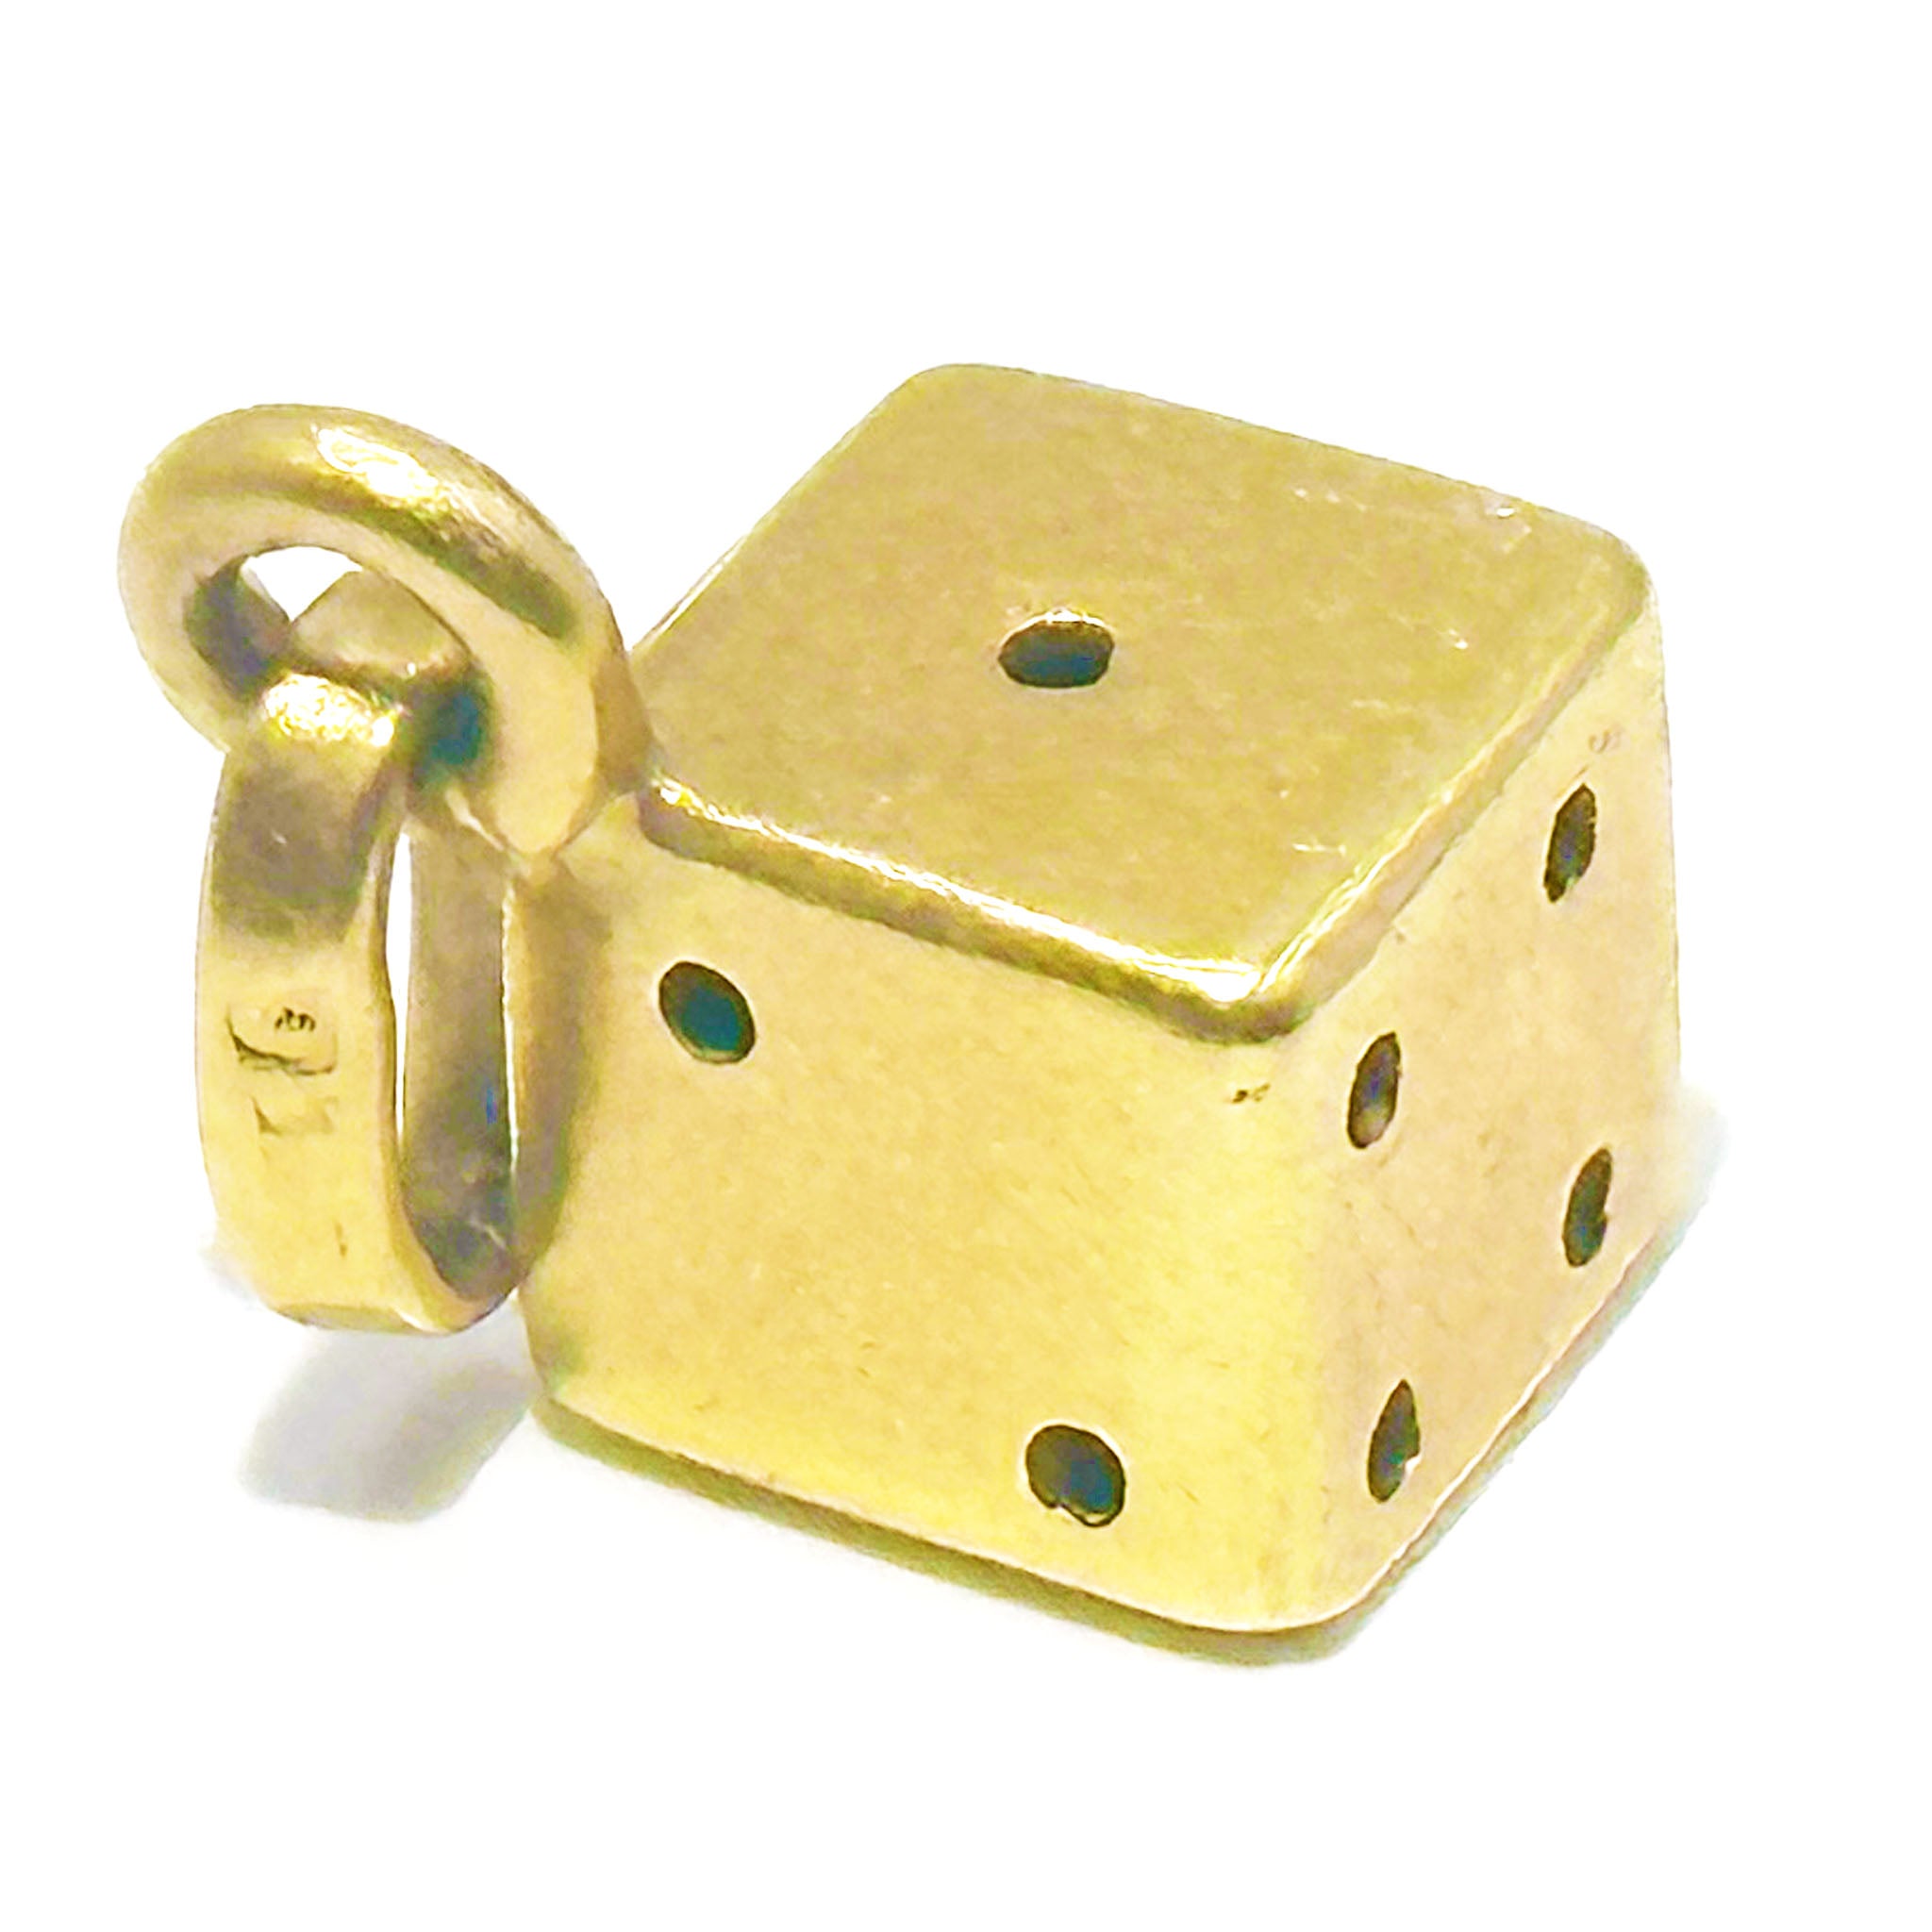 $550 14kt Yellow Gold Three Dimensional Dice Charm